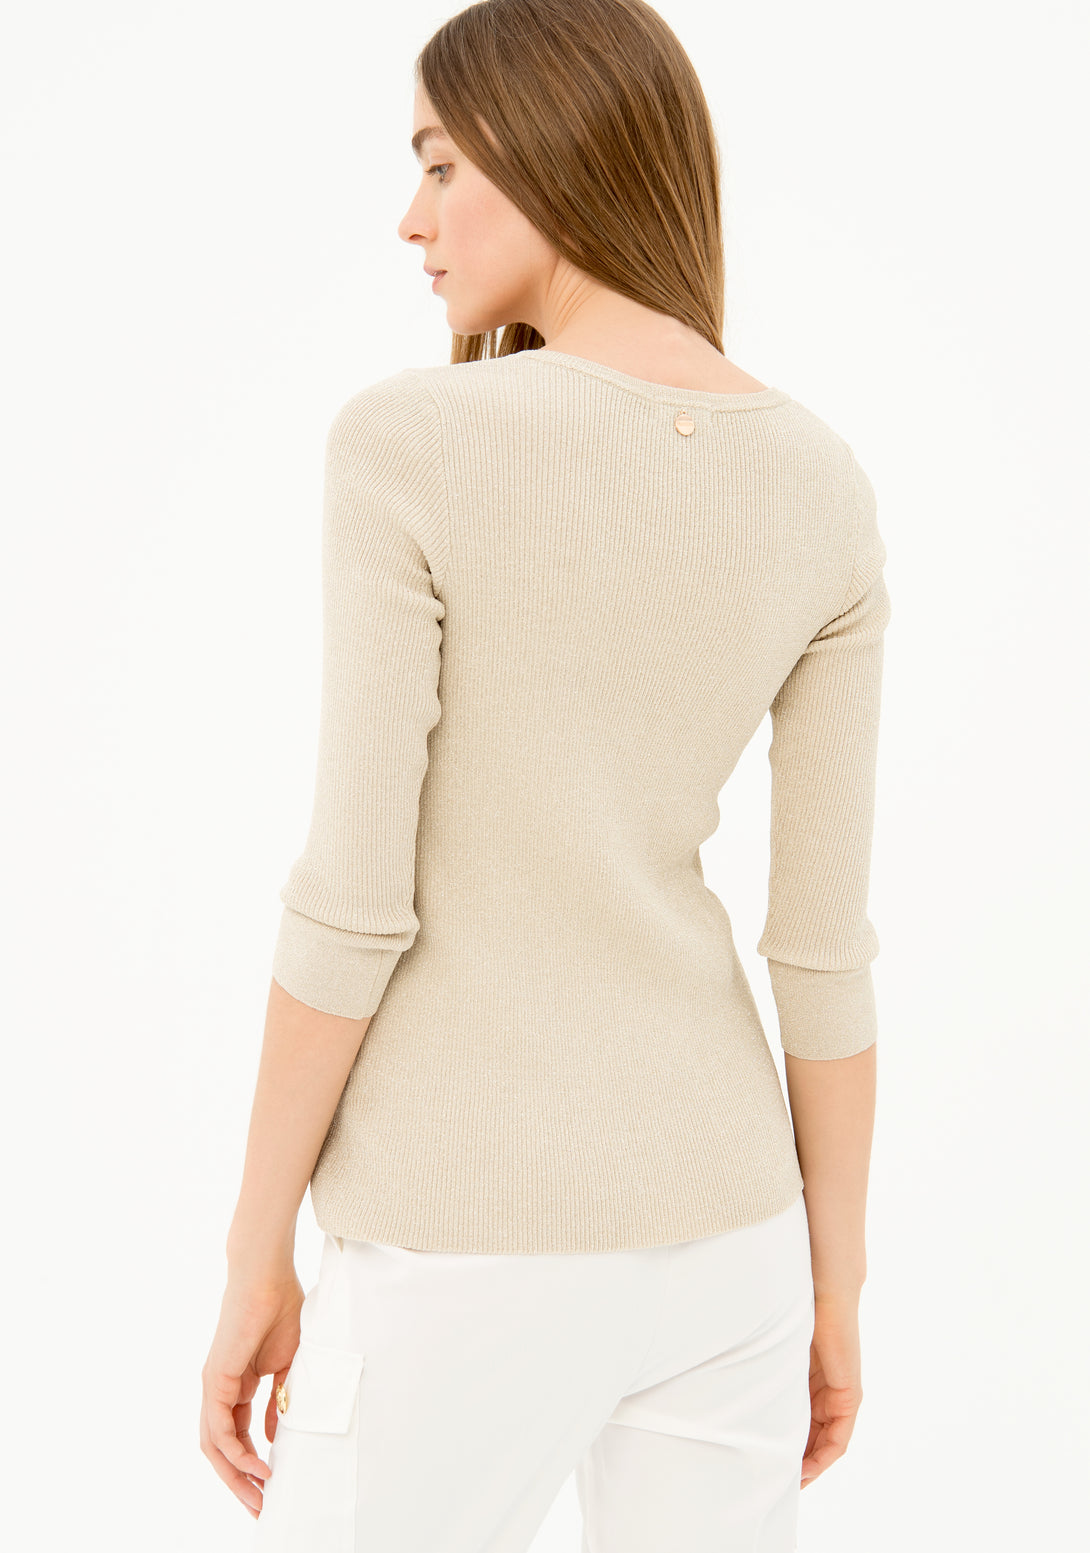 Knitwear wide fit made in rib stitch with lurex